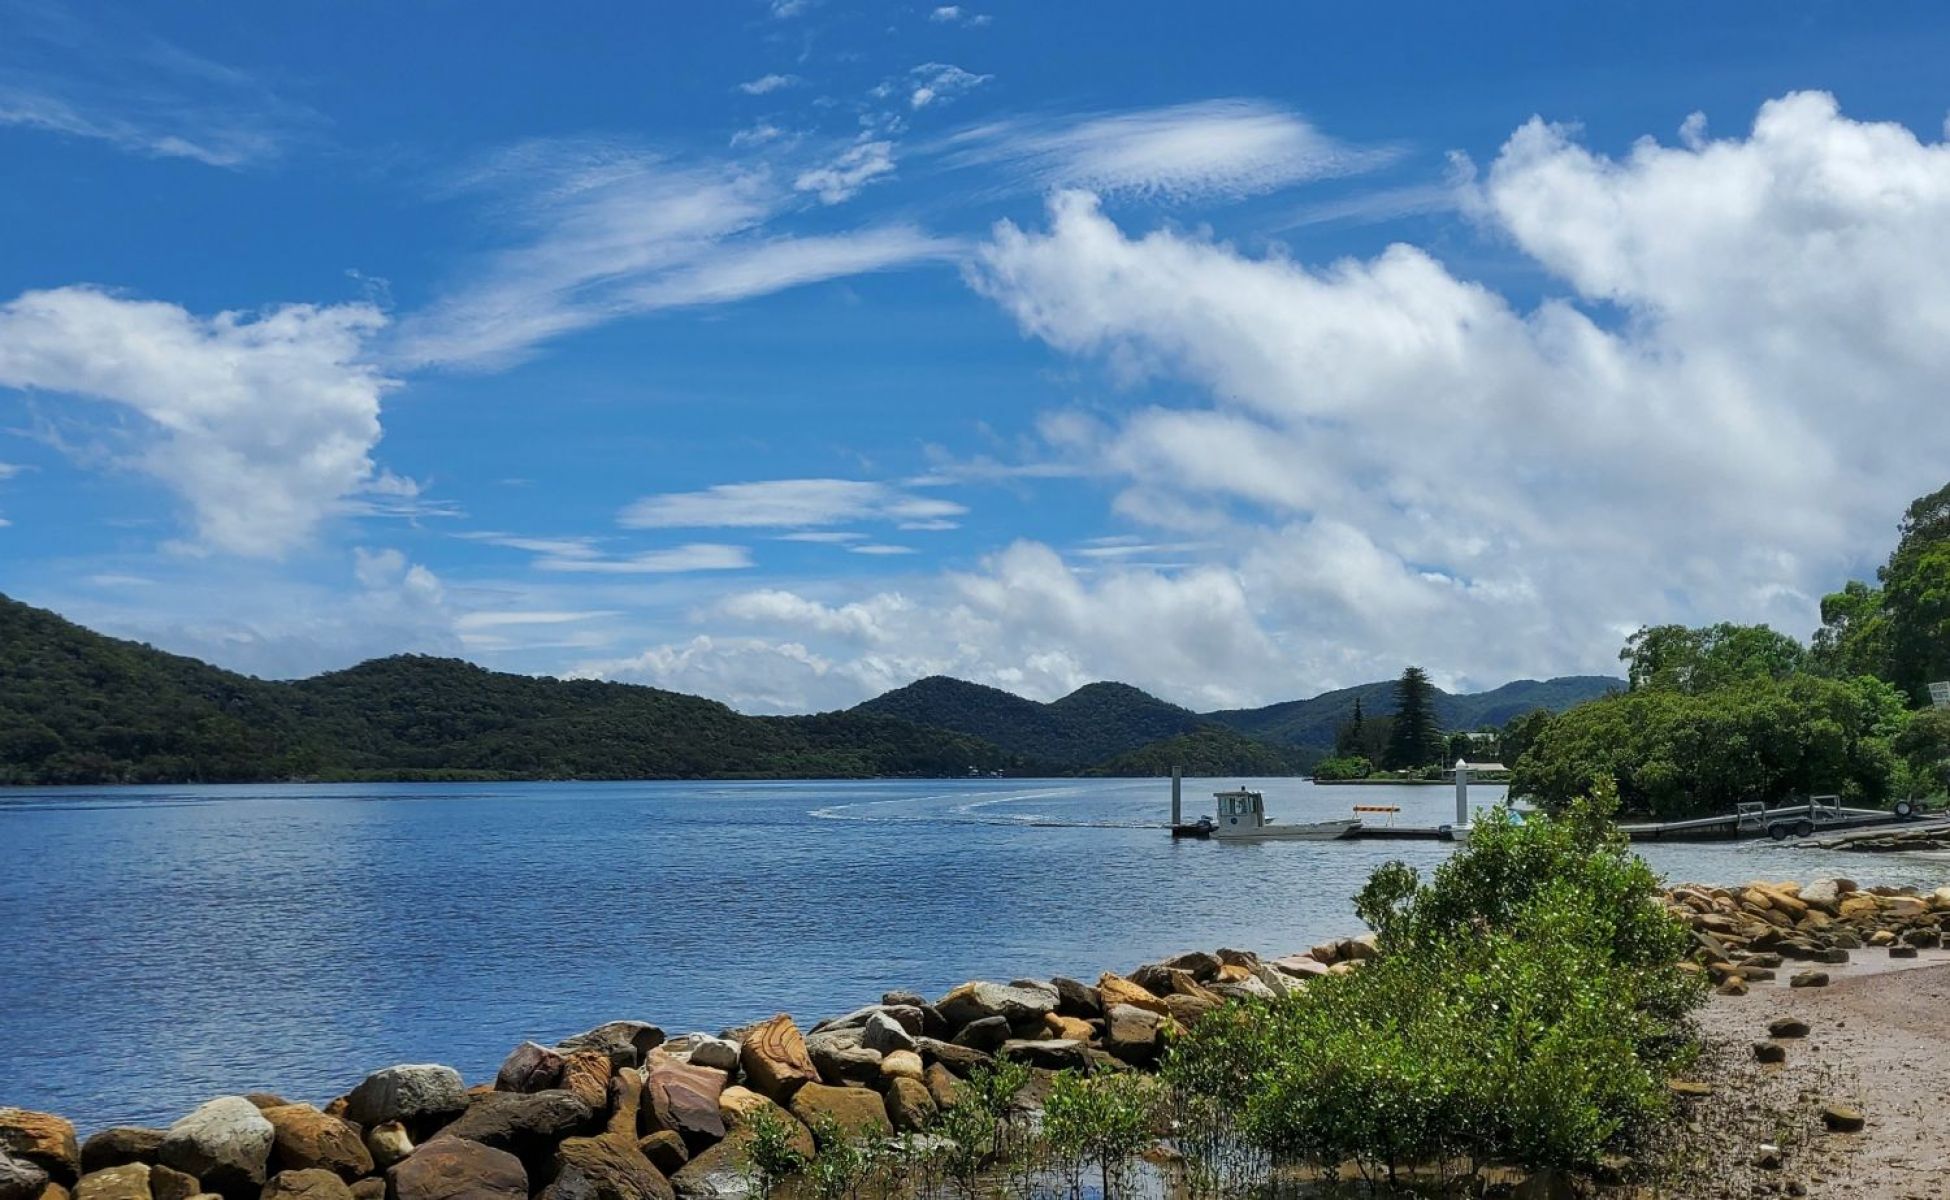 A boat along the shoreline of Lake Eildon with hills in the background and a shoreline in the foreground.